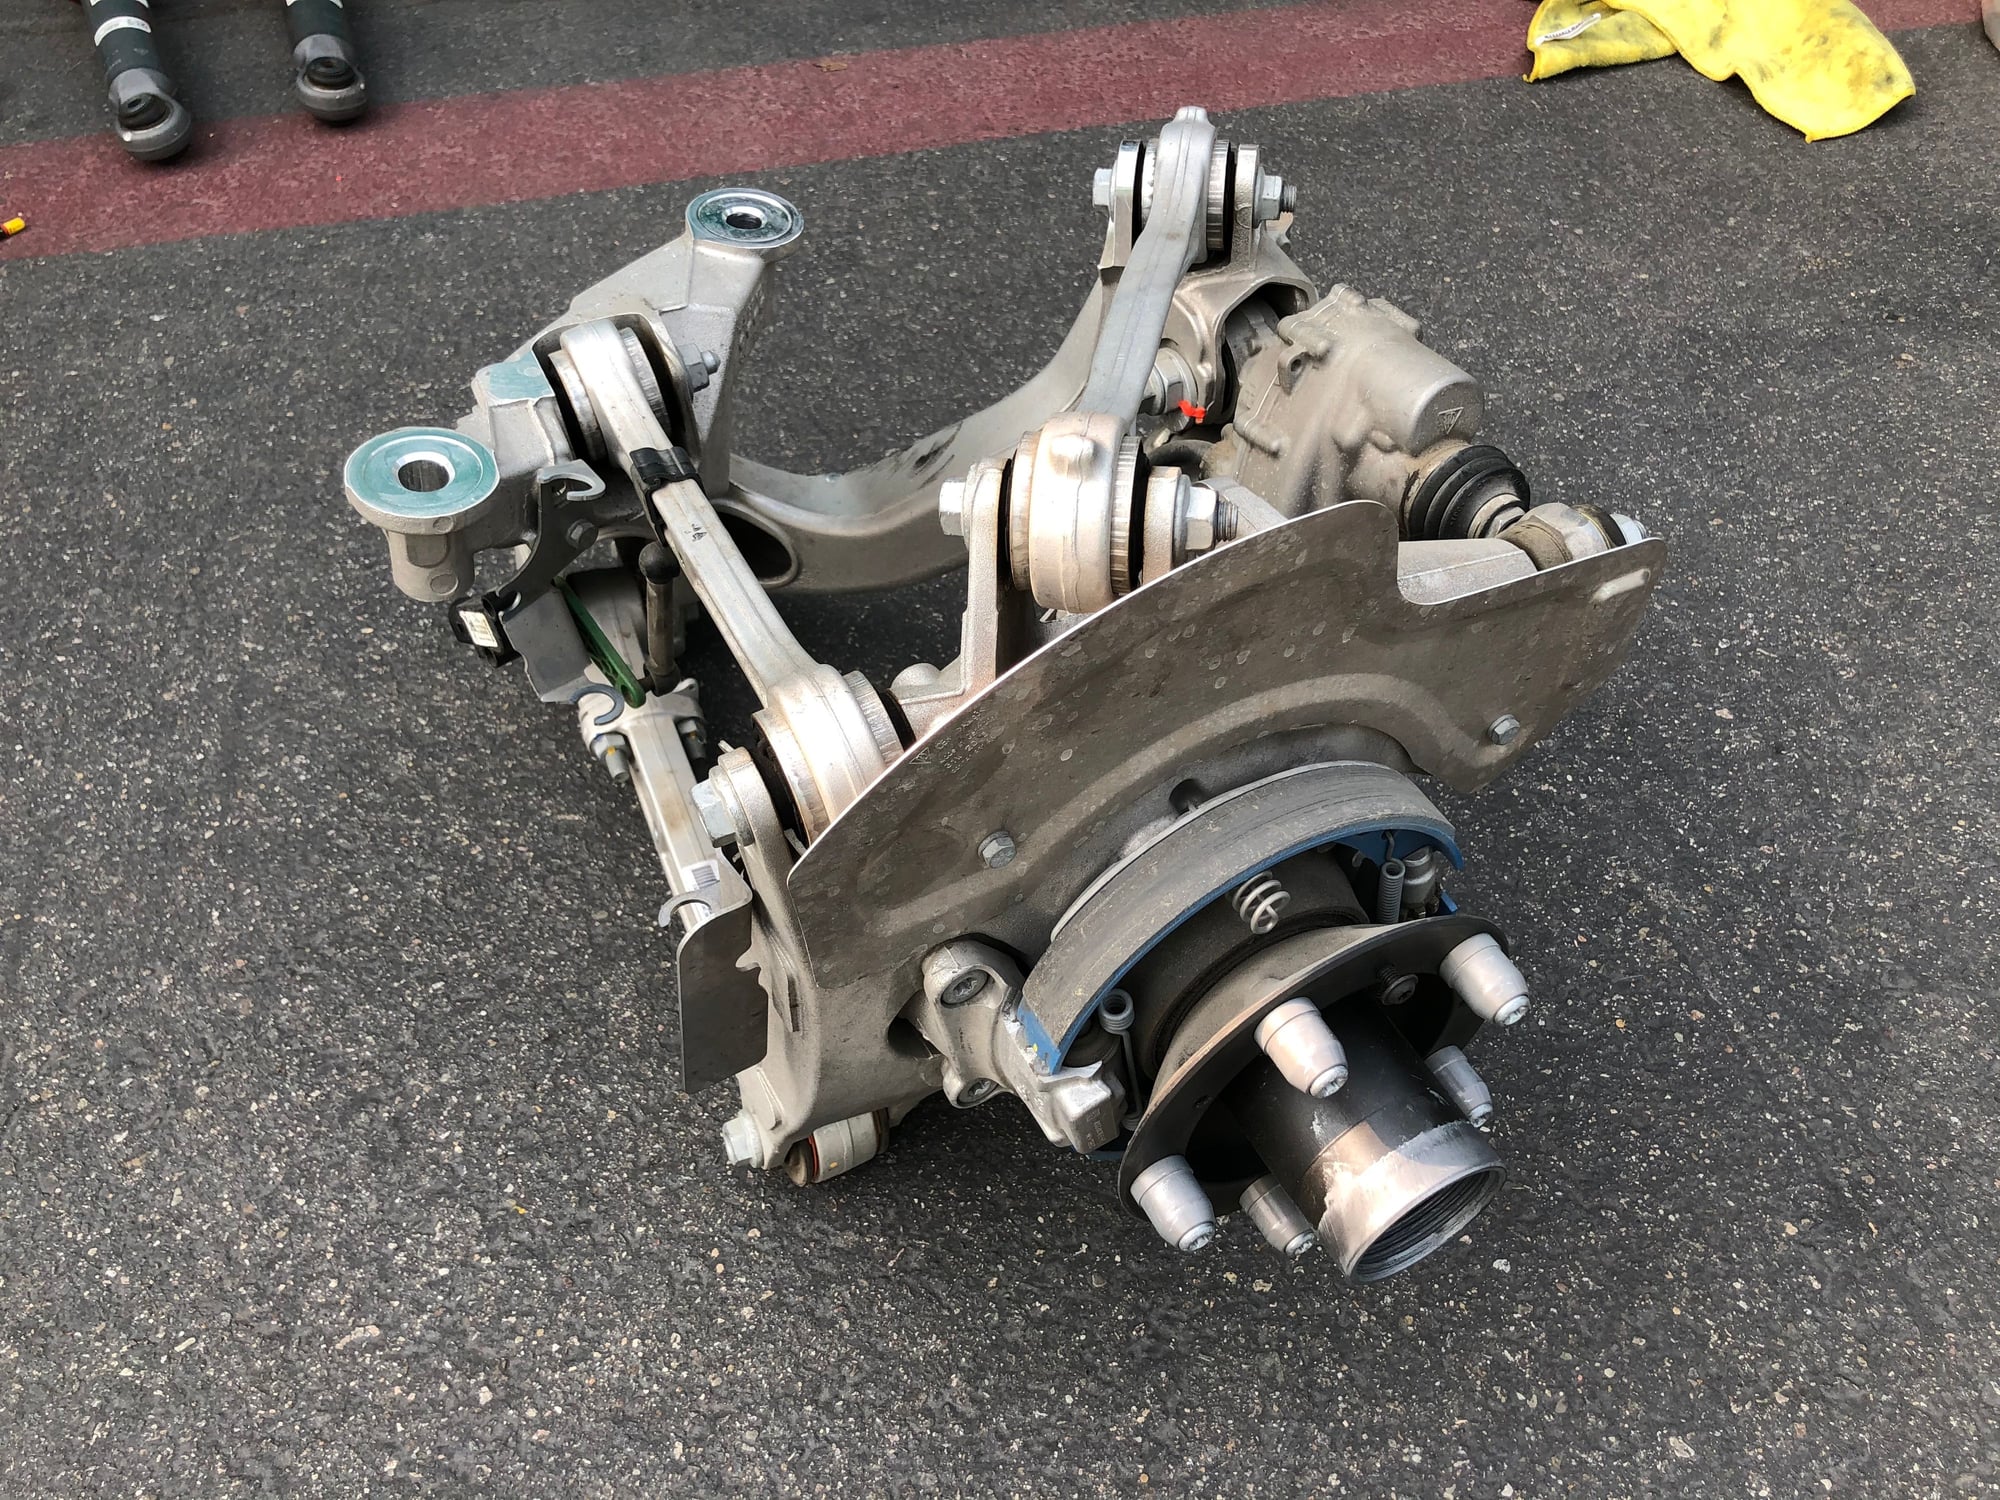 2018 Porsche GT3 - Entire rear spindle left and right - Steering/Suspension - $3,500 - Irvine, CA 92620, United States